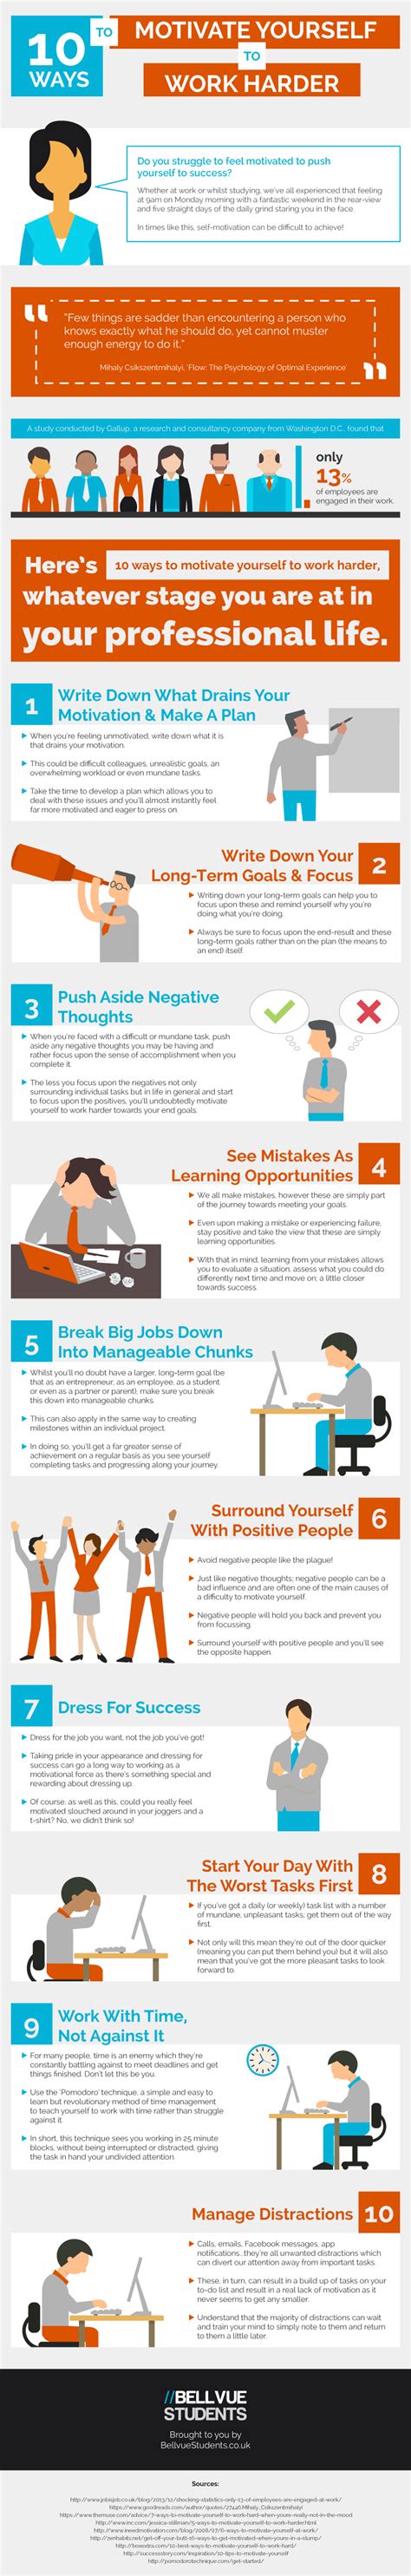 10 Ways To Motivate Yourself To Work Harder Infographic Online